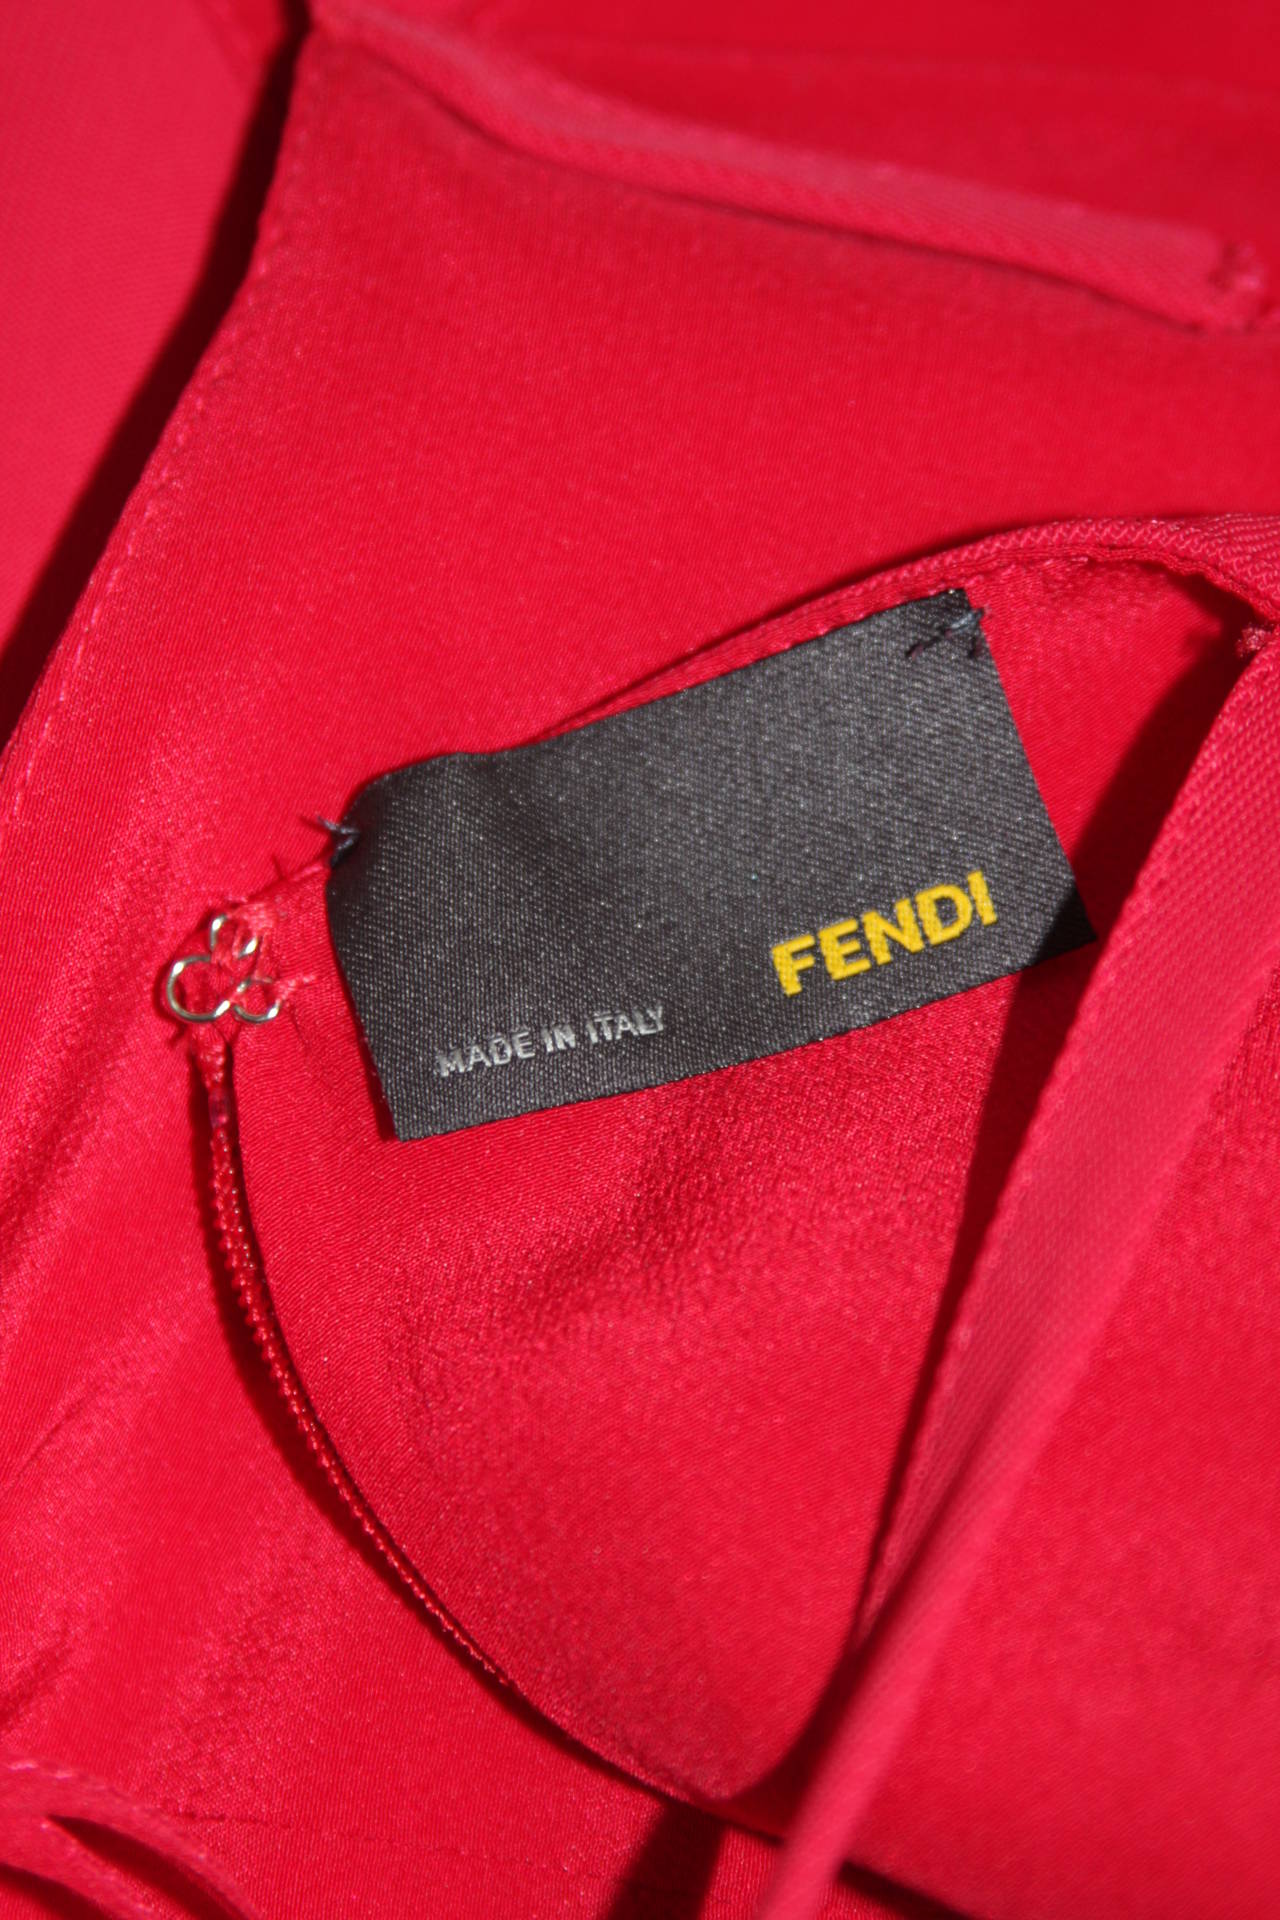 Fendi Red Cocktail Dress with Caplet Attachment and Button Details Size 2 For Sale 3